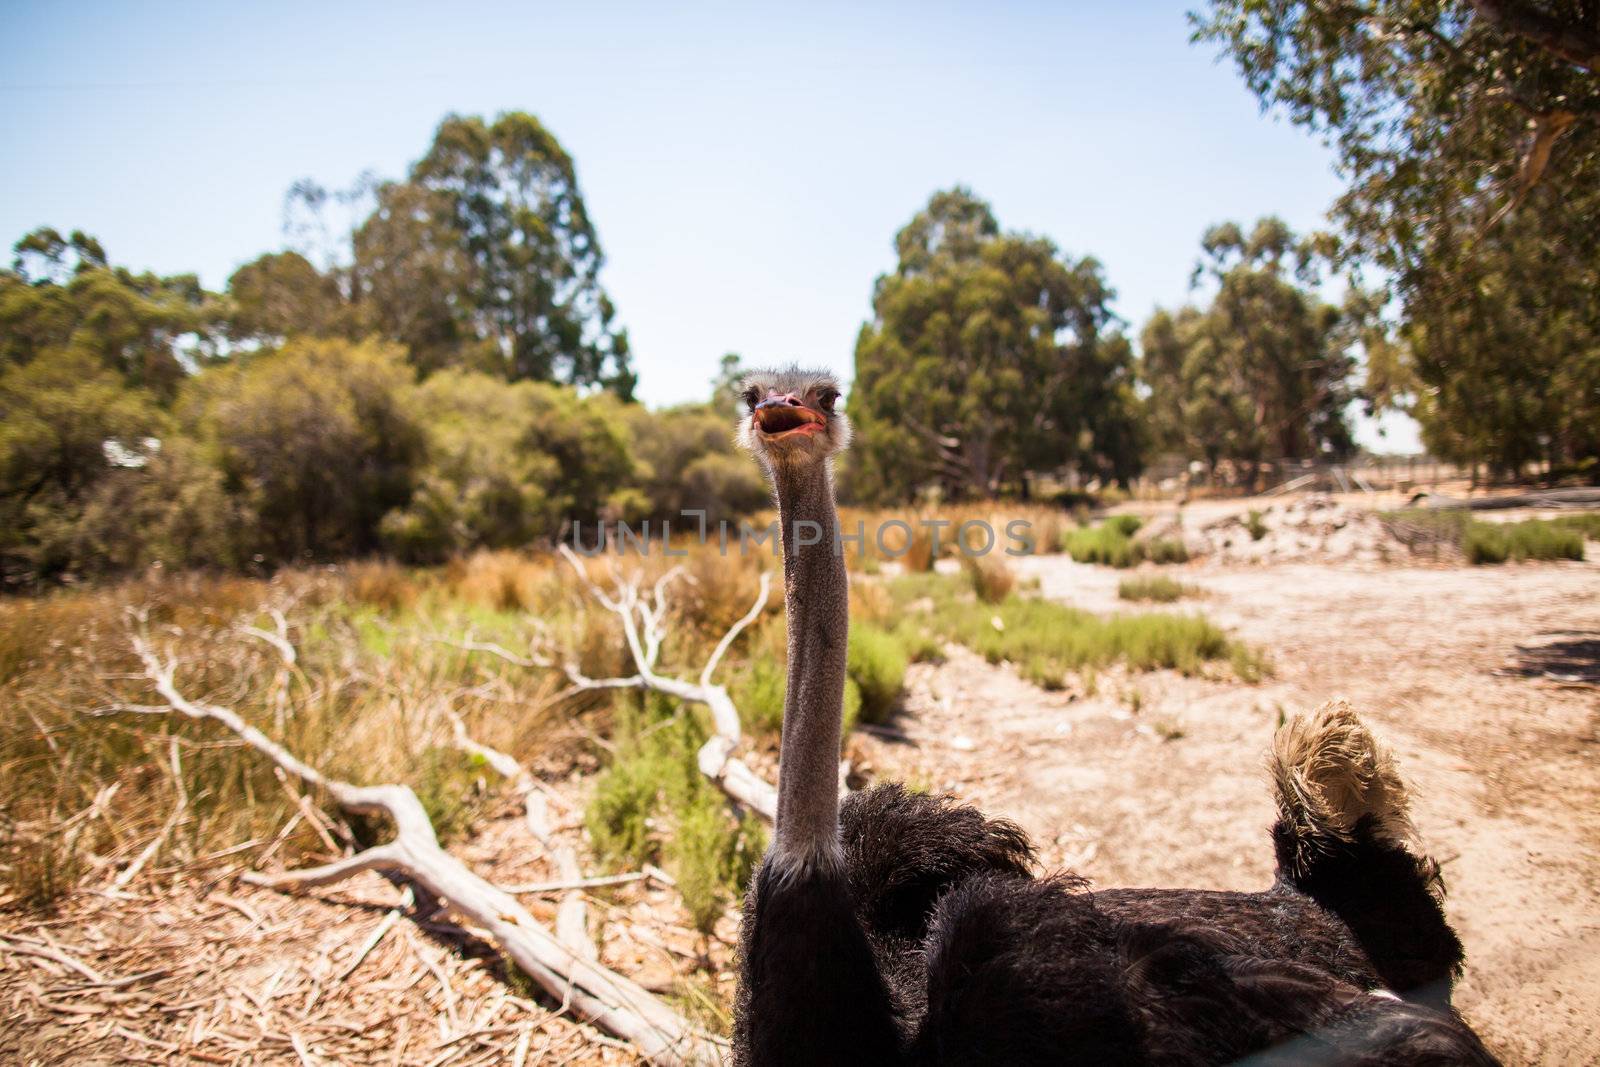 Wild ostrich stares into the camera with its curious gesture.